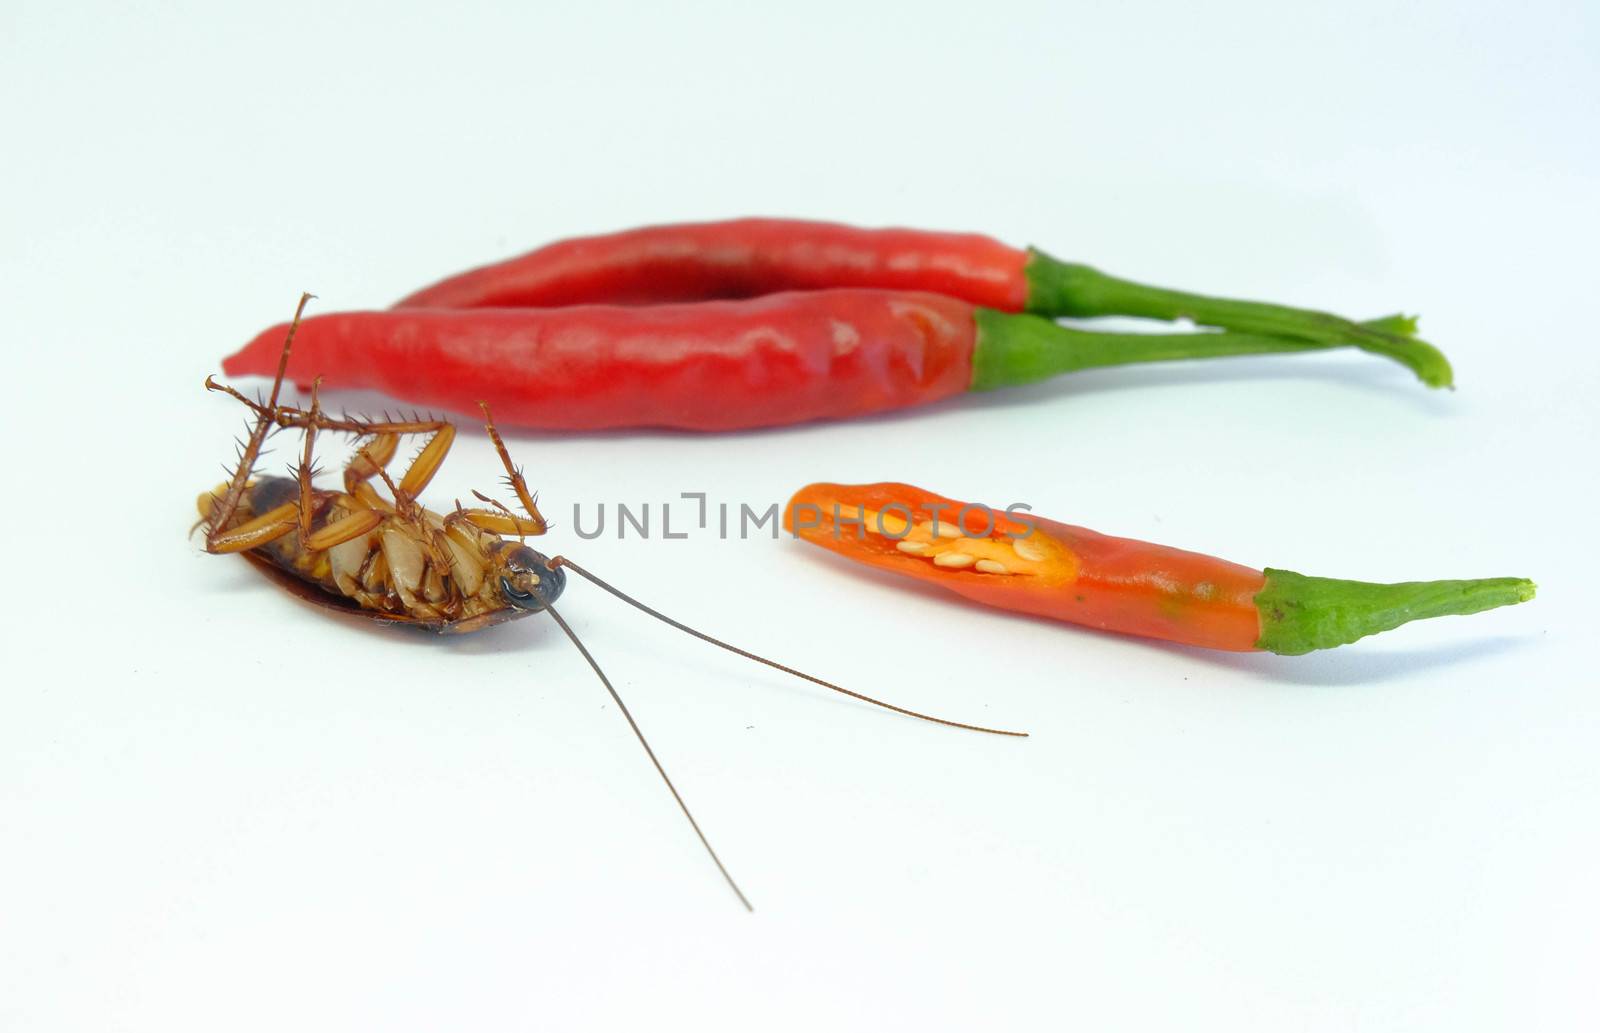 A chili can chase cockroaches,Close up cockroach chili on isolat by e22xua